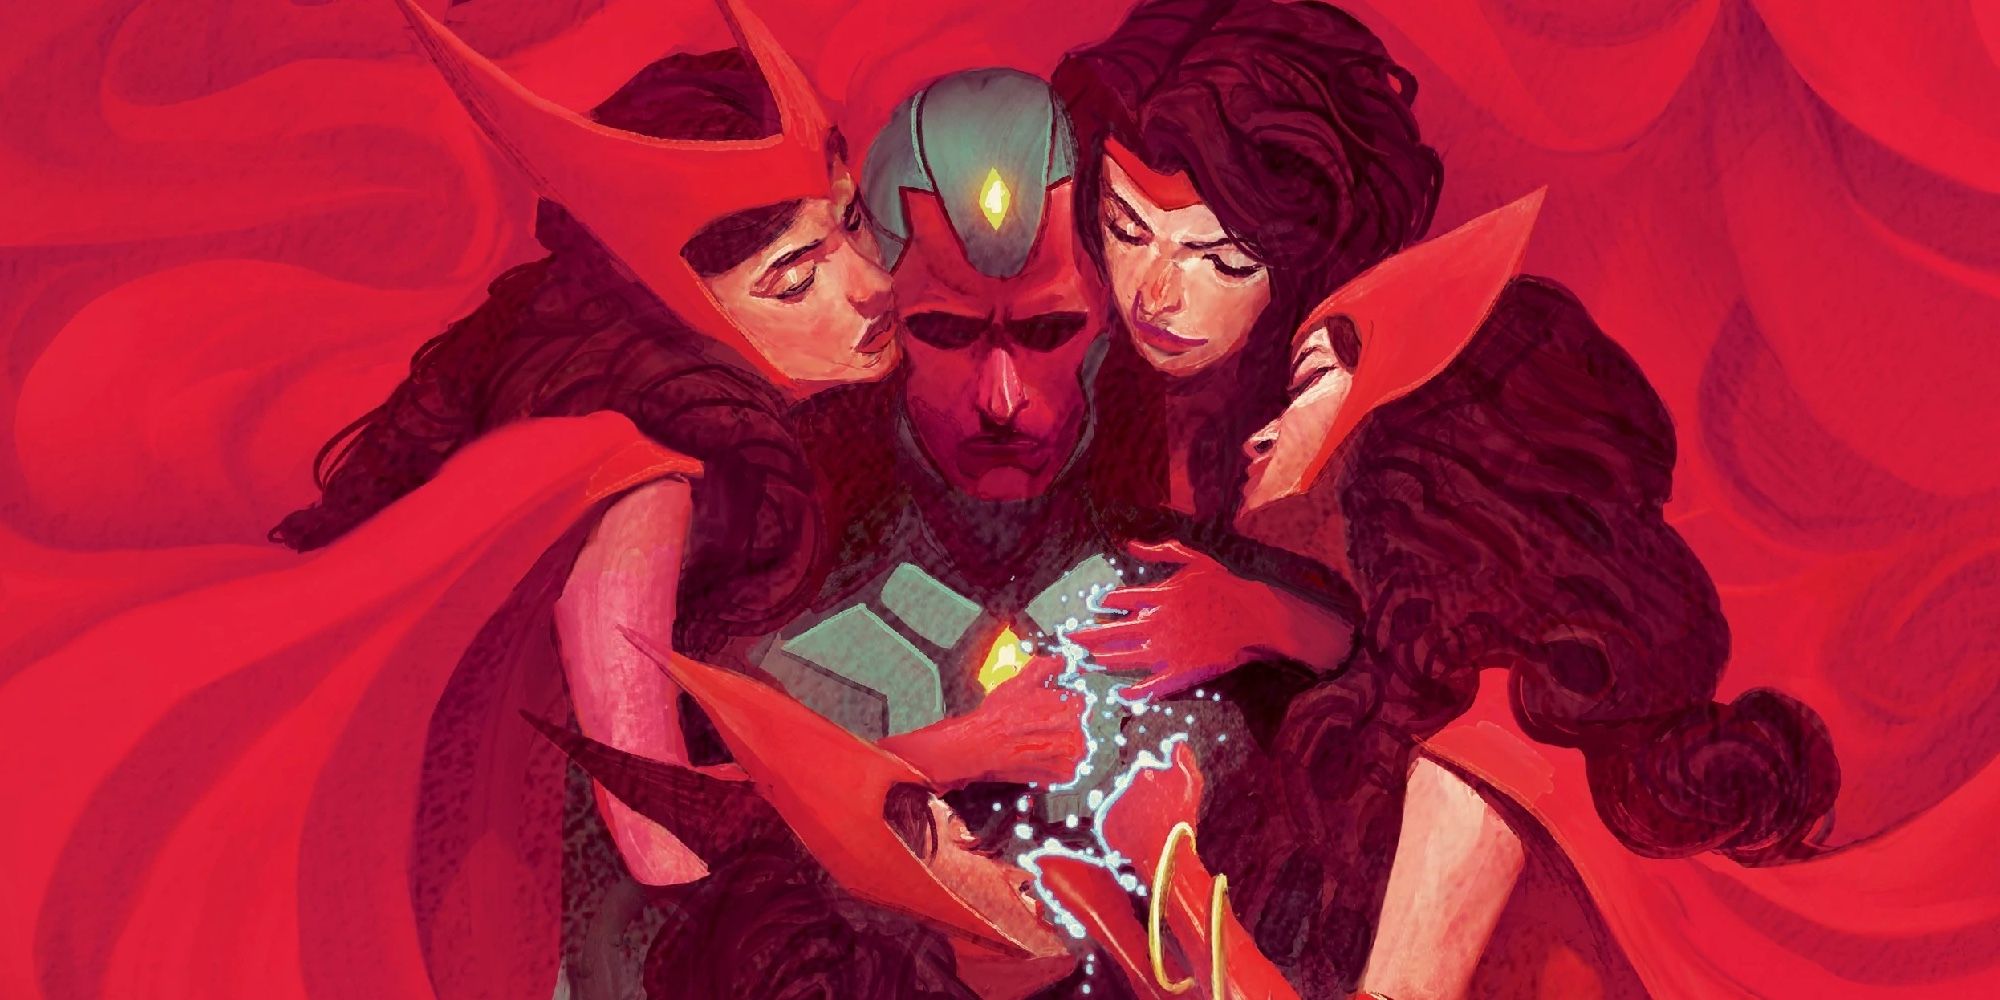 Vision haunted by Scarlet Witch on Vision #7 cover.